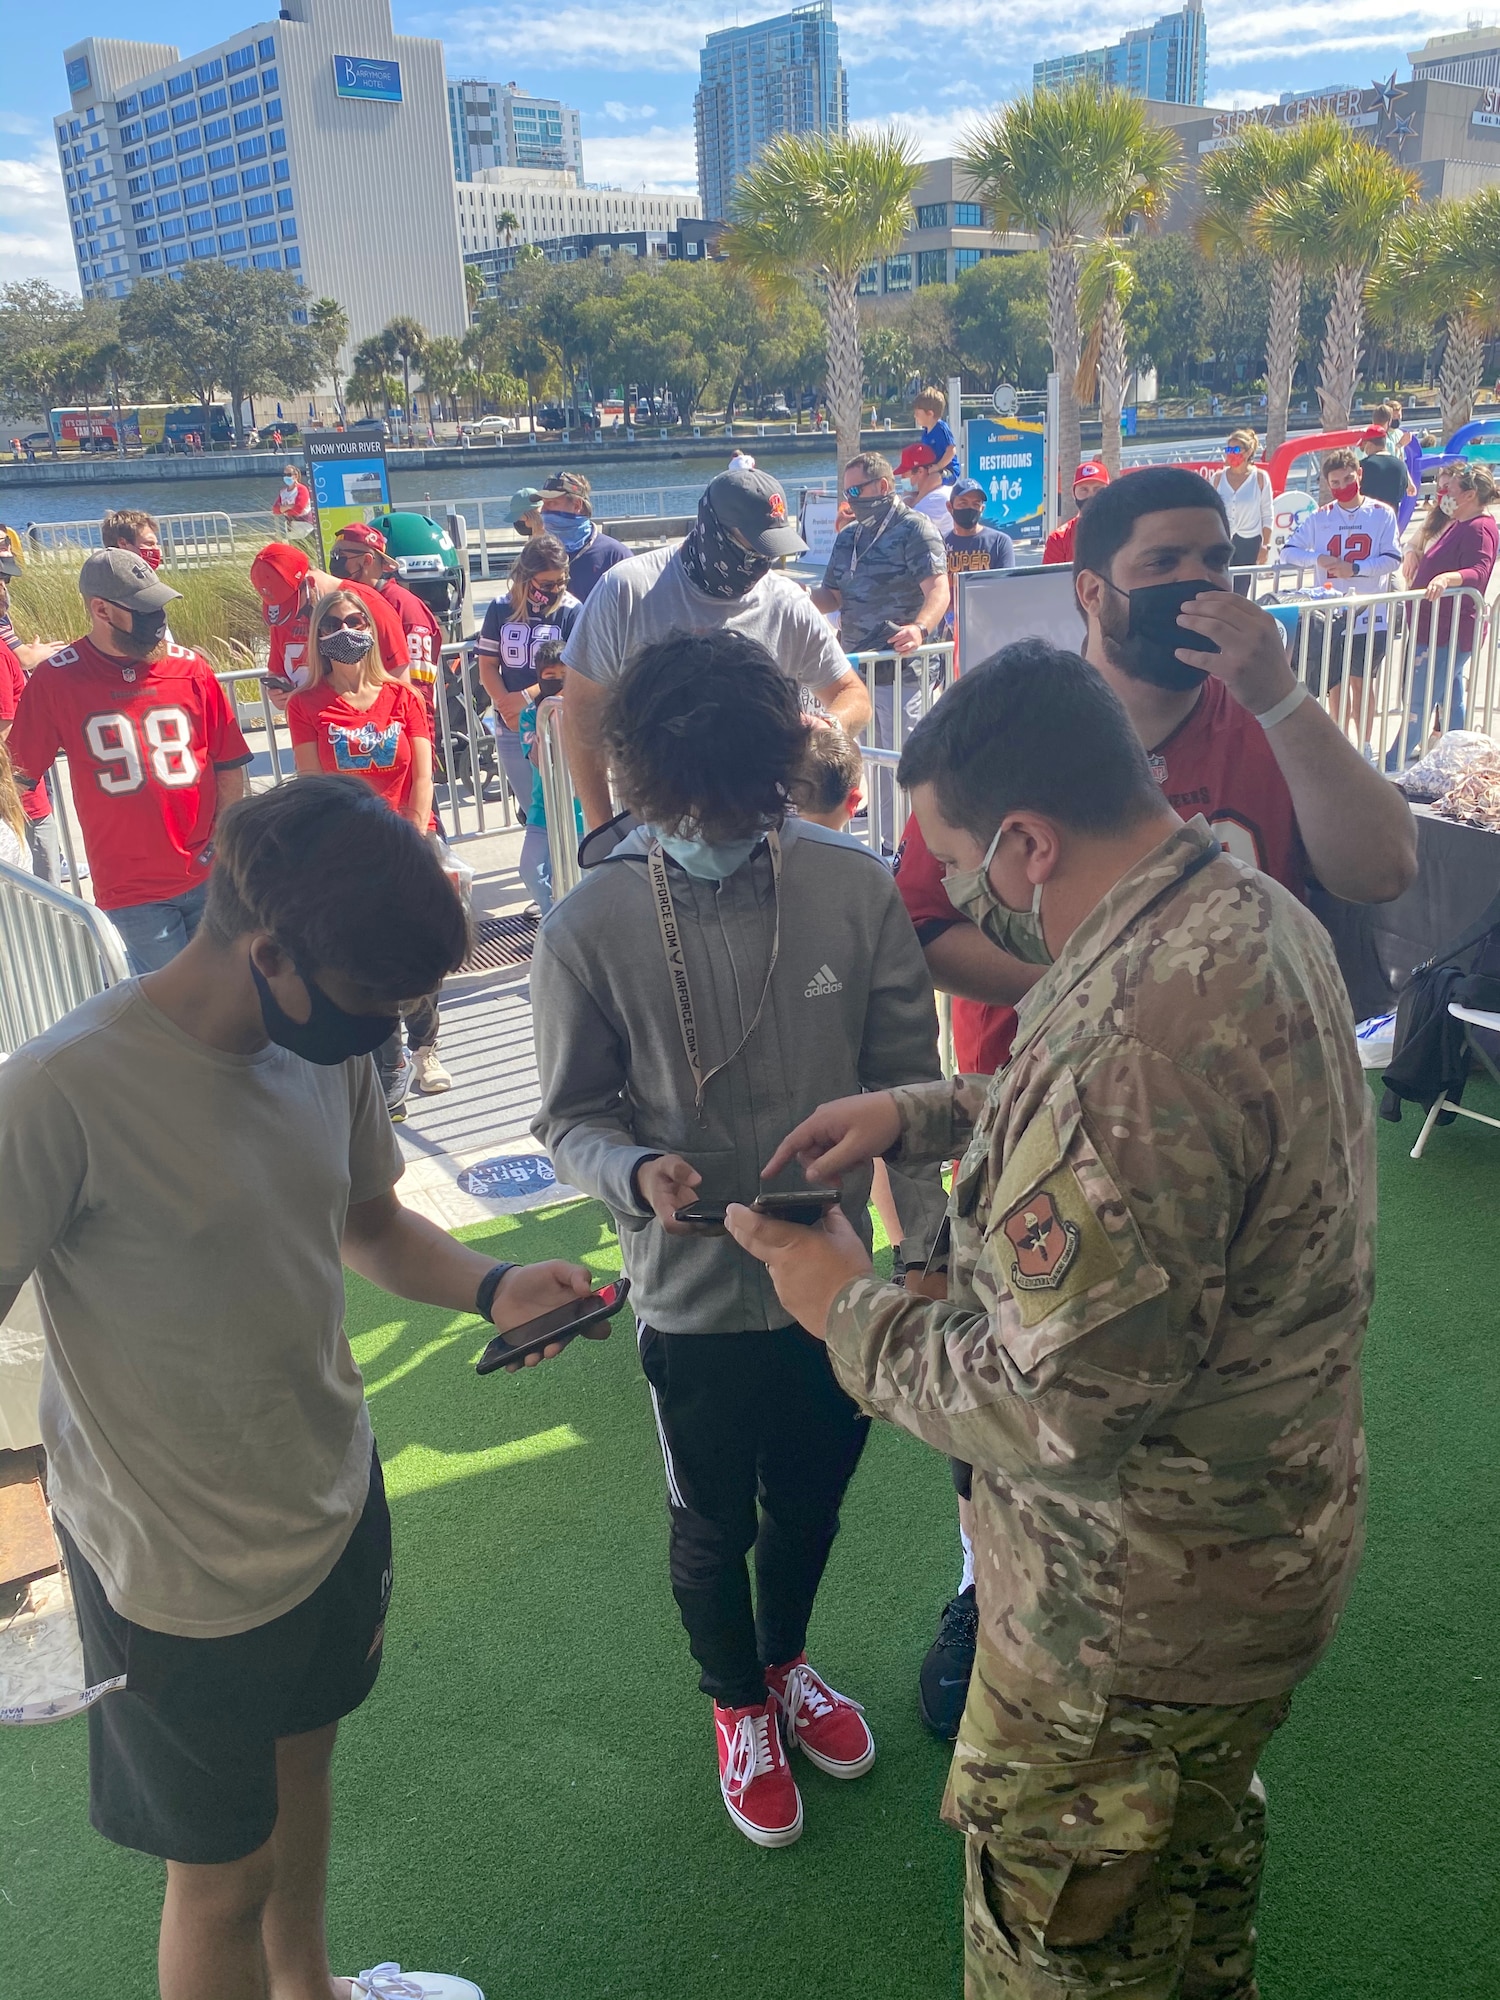 Tech. Sgt. Jonathan Bell, a special warfare recruiter with the 330th Recruiting Squadron, showed a group of fans the airforce.com webpage while waiting to use the AIR RAID QB SIM Experience.